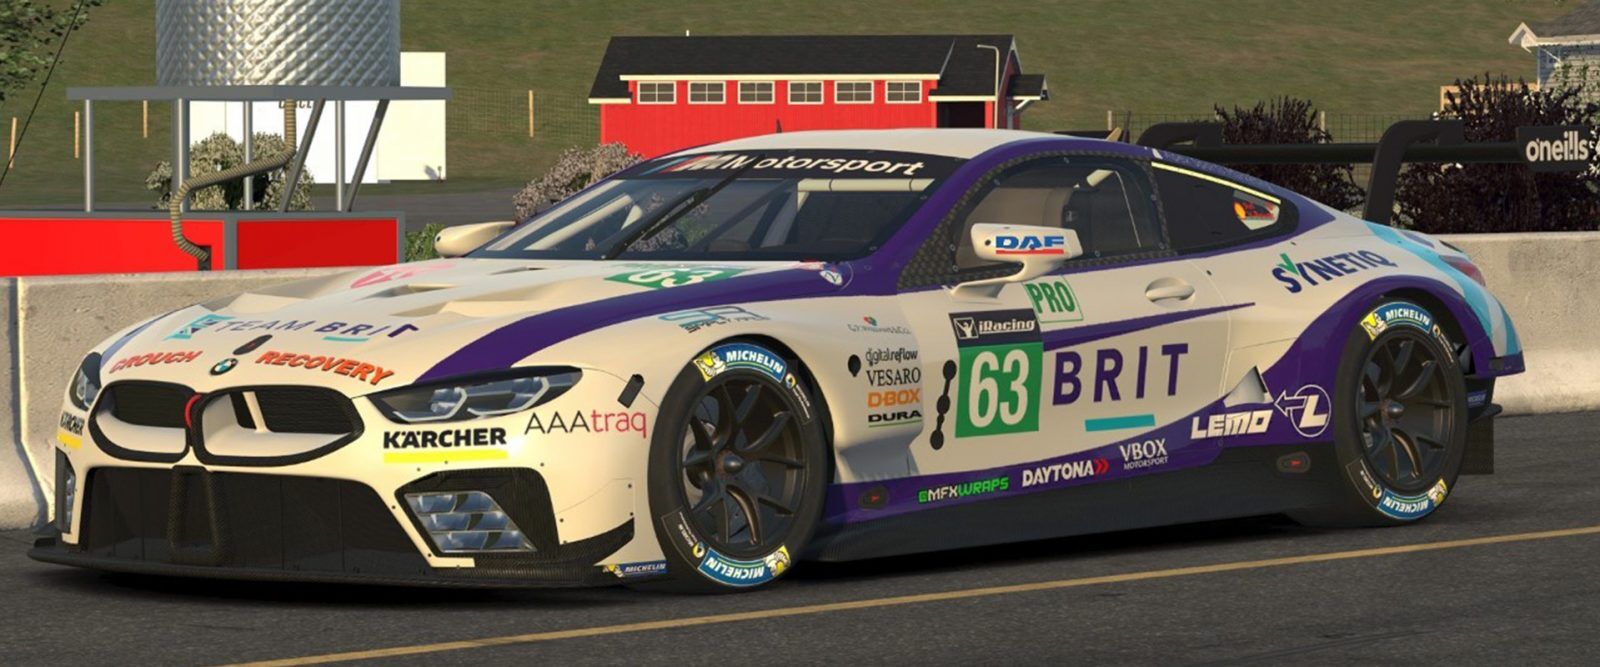 ETeam Brit and their mission to make sim racing more inclusive